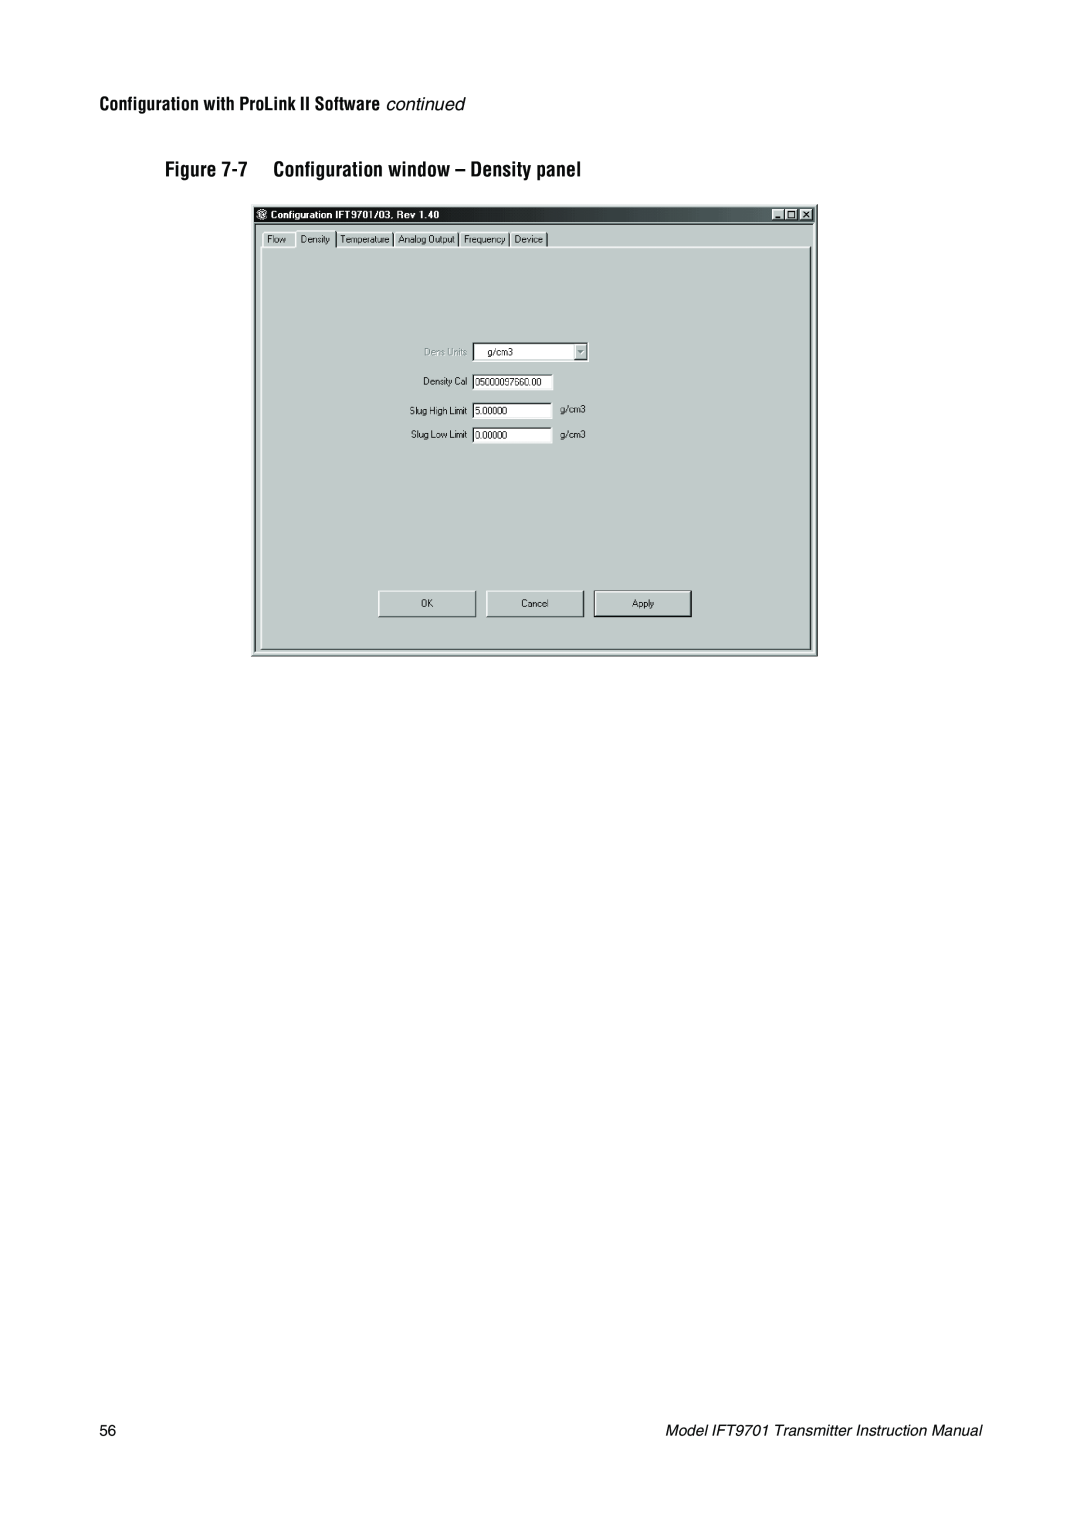 Emerson IFT9701 instruction manual 7Configuration window - Density panel, Configuration with ProLink II Software continued 